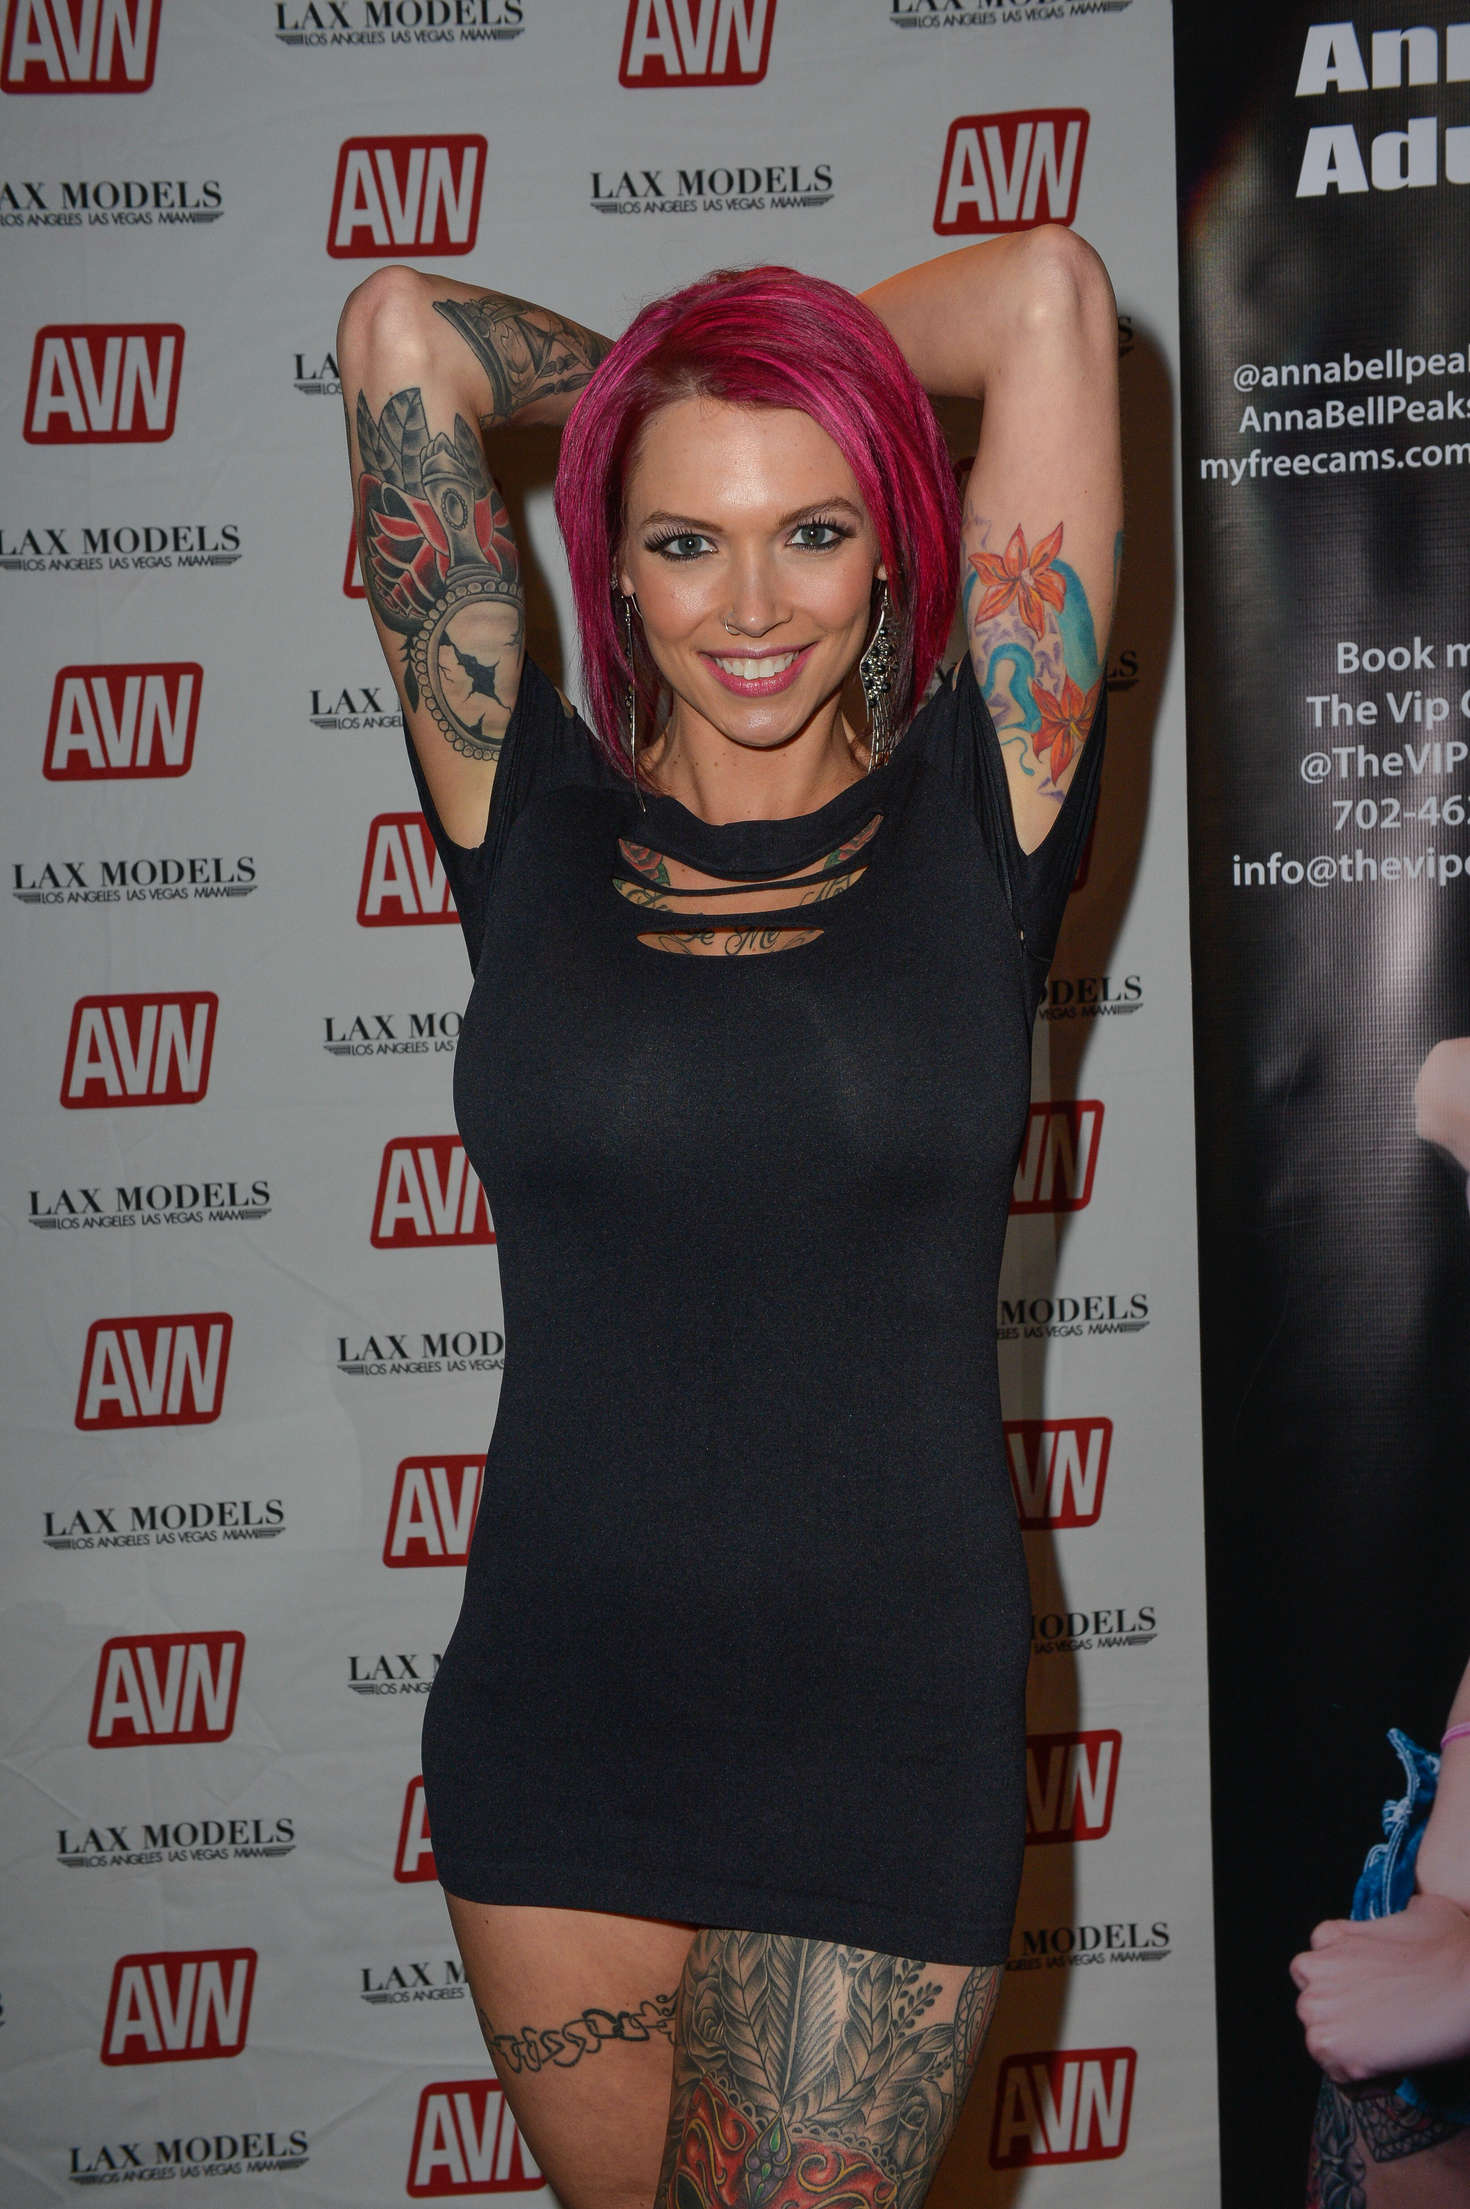 https://www.gotceleb.com/wp-content/uploads/photos/anna-bell/peaks-avn-adult-entertainment-expo-at-hard-rock-hotel-in-las-vegas/Anna-Bell-Peaks:-AVN-Adult-Entertainment-Expo--02.jpg